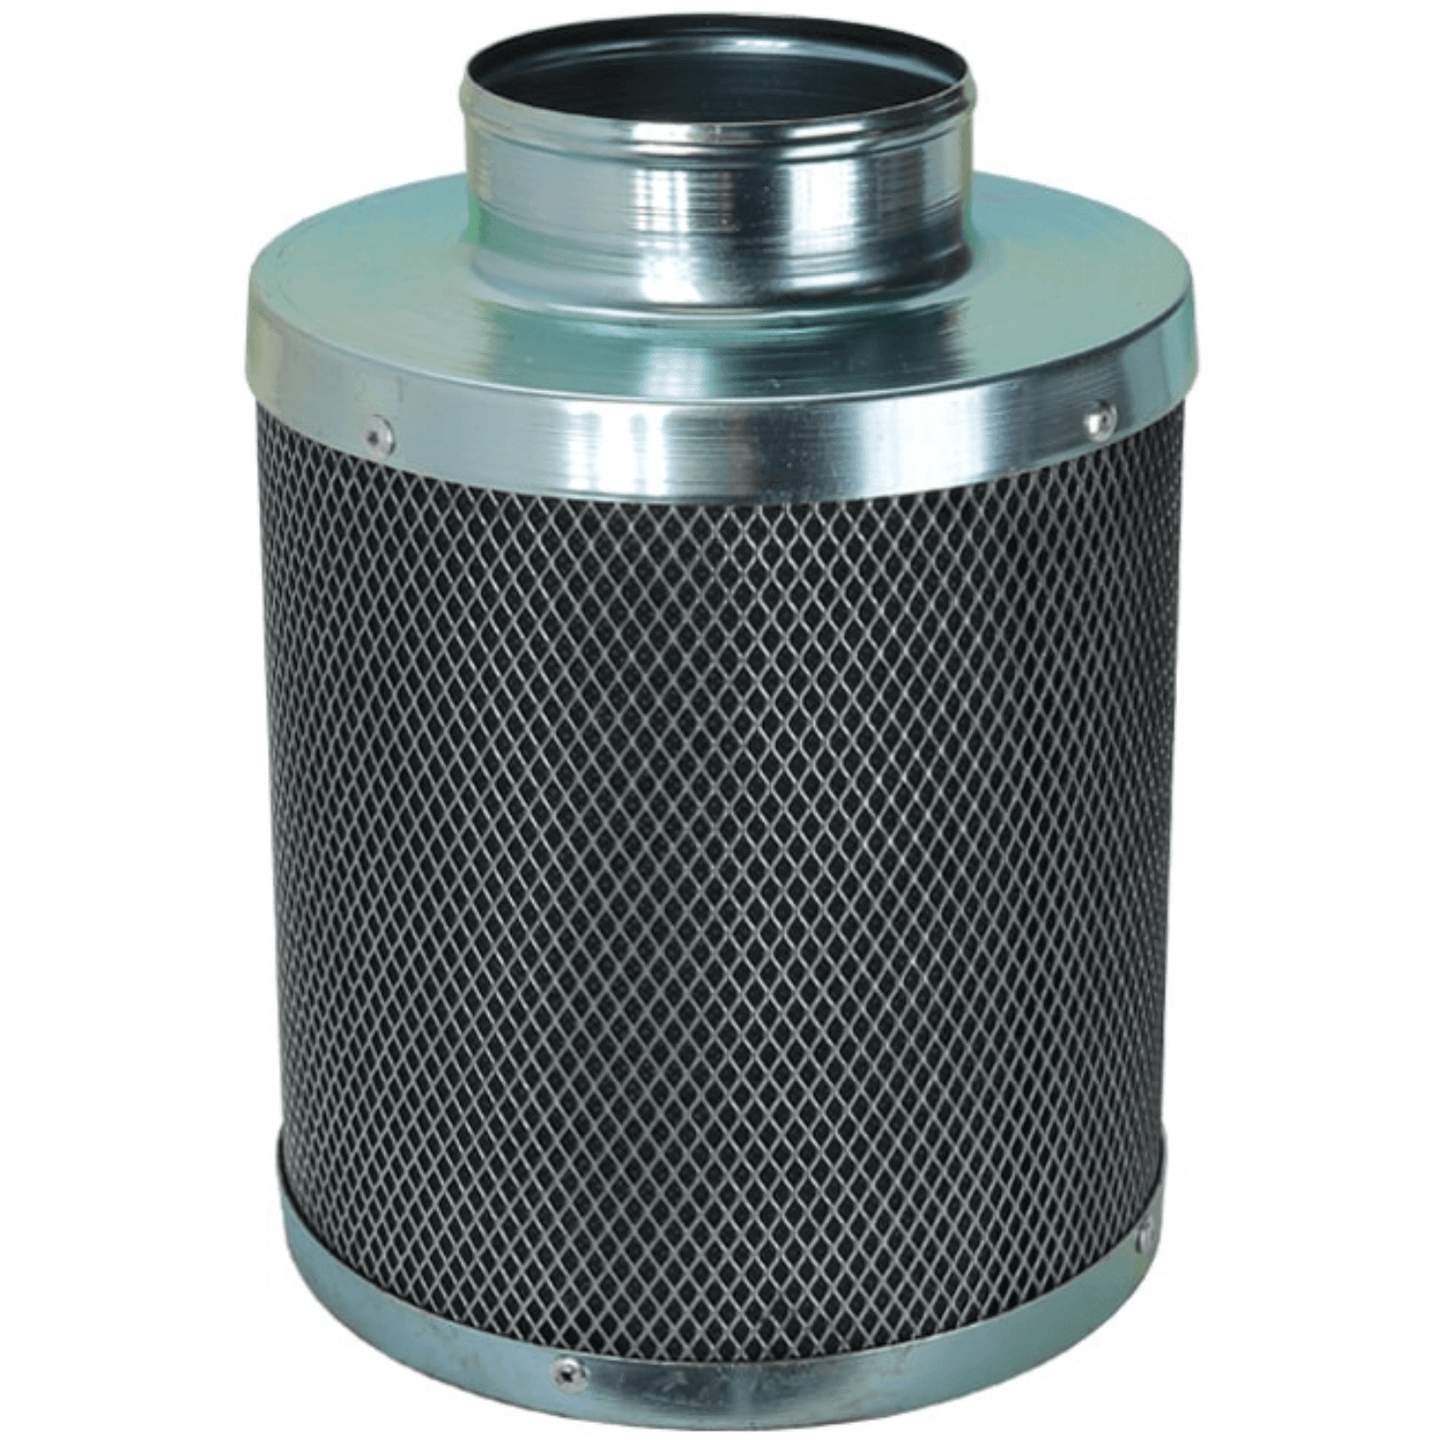 Charco Filters Plus 14" x 40" Activated Carbon Air Filter 971214-1 Climate Control 850009530721